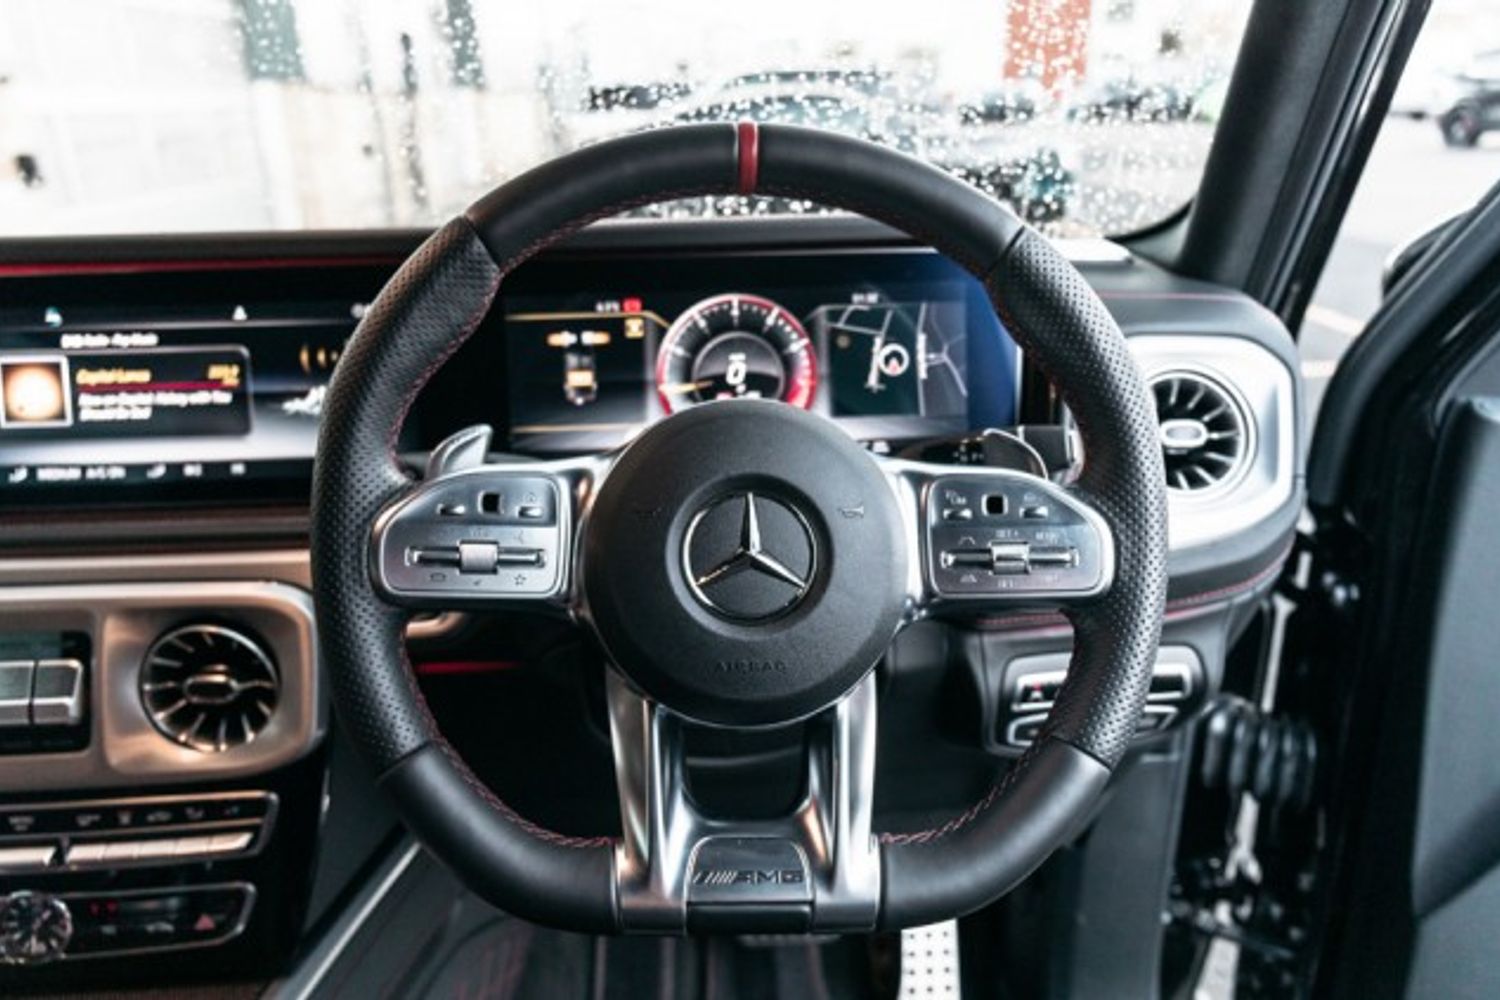 MERCEDES-BENZ G-CLASS ESTATE 4.0 AMG G 63 4MATIC EDITION 1 5DR AUTOMATIC